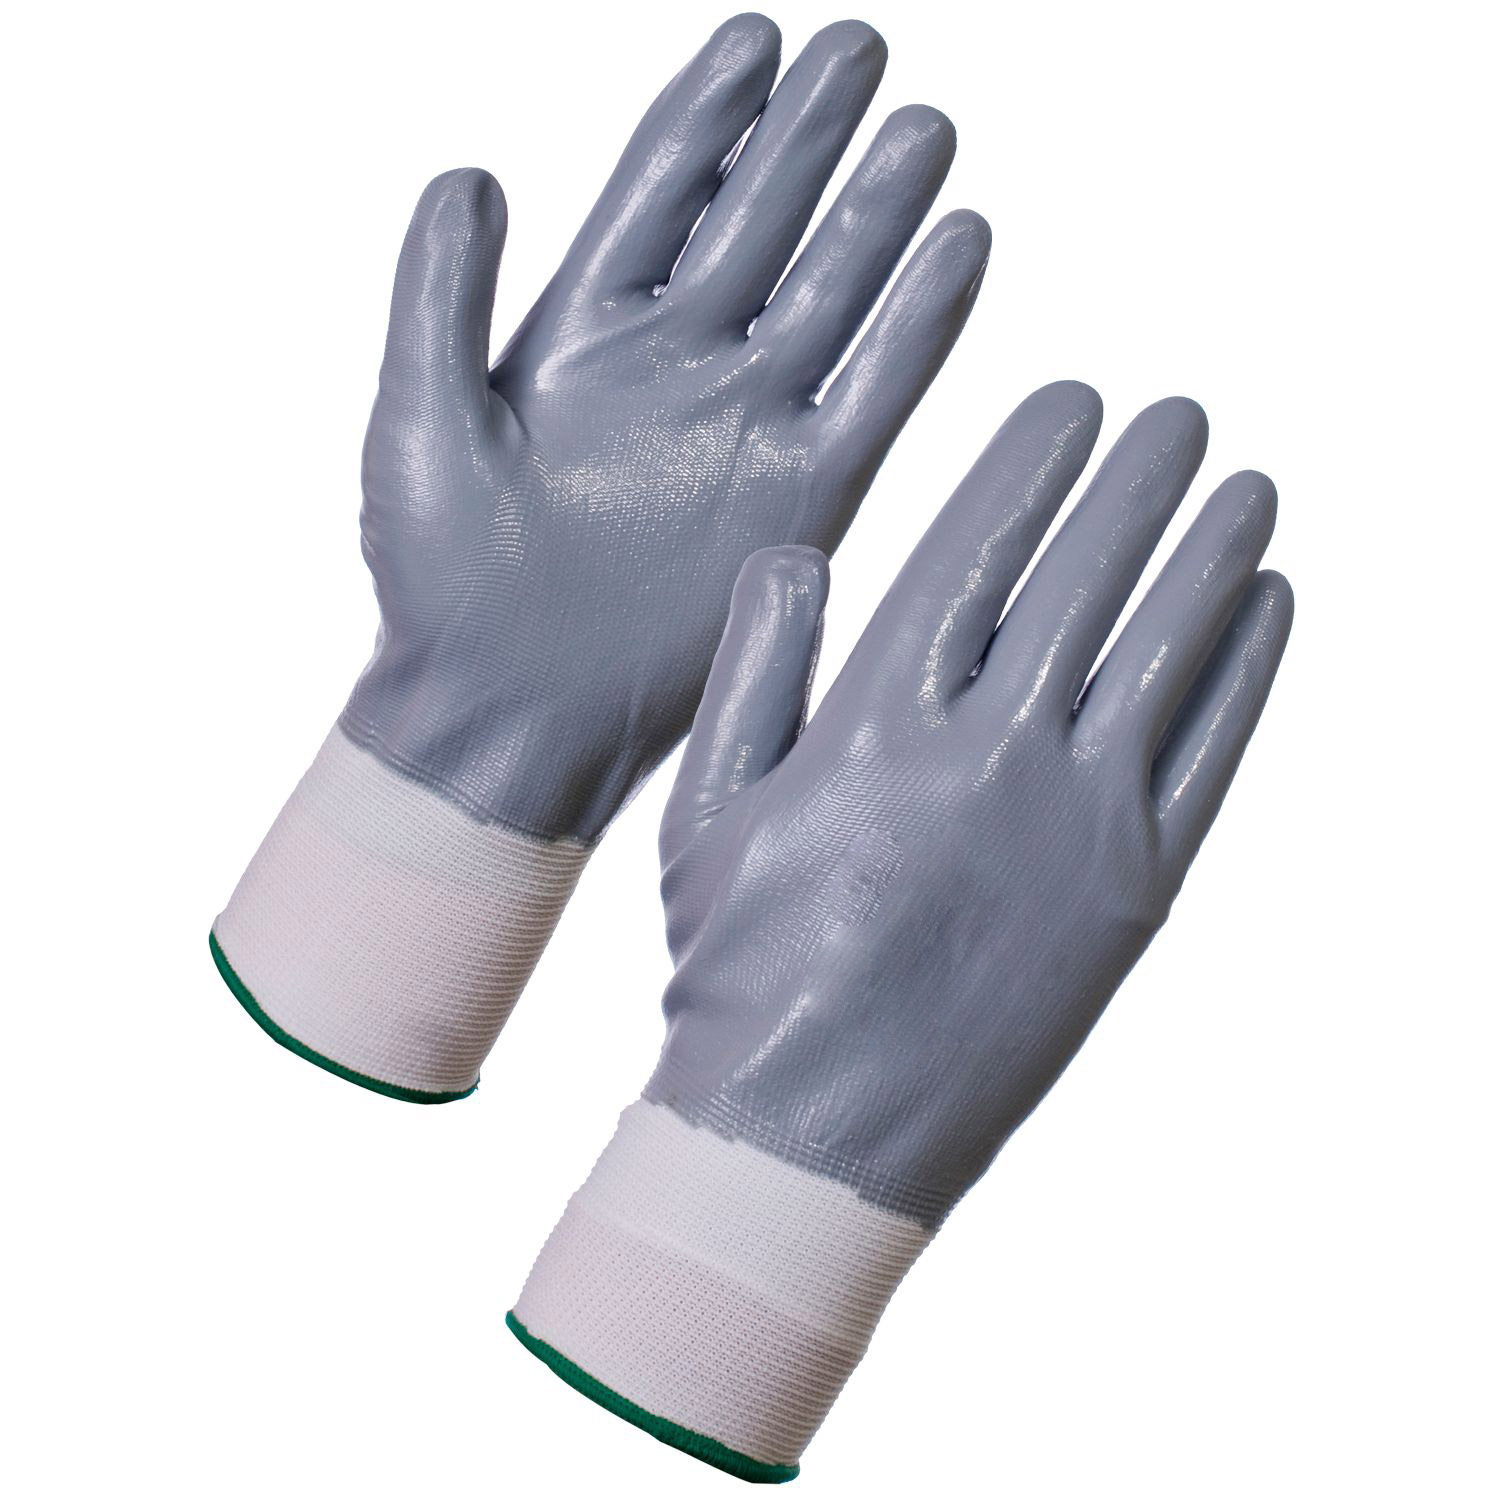 Nitrotouch Plus Full Dipped Gloves